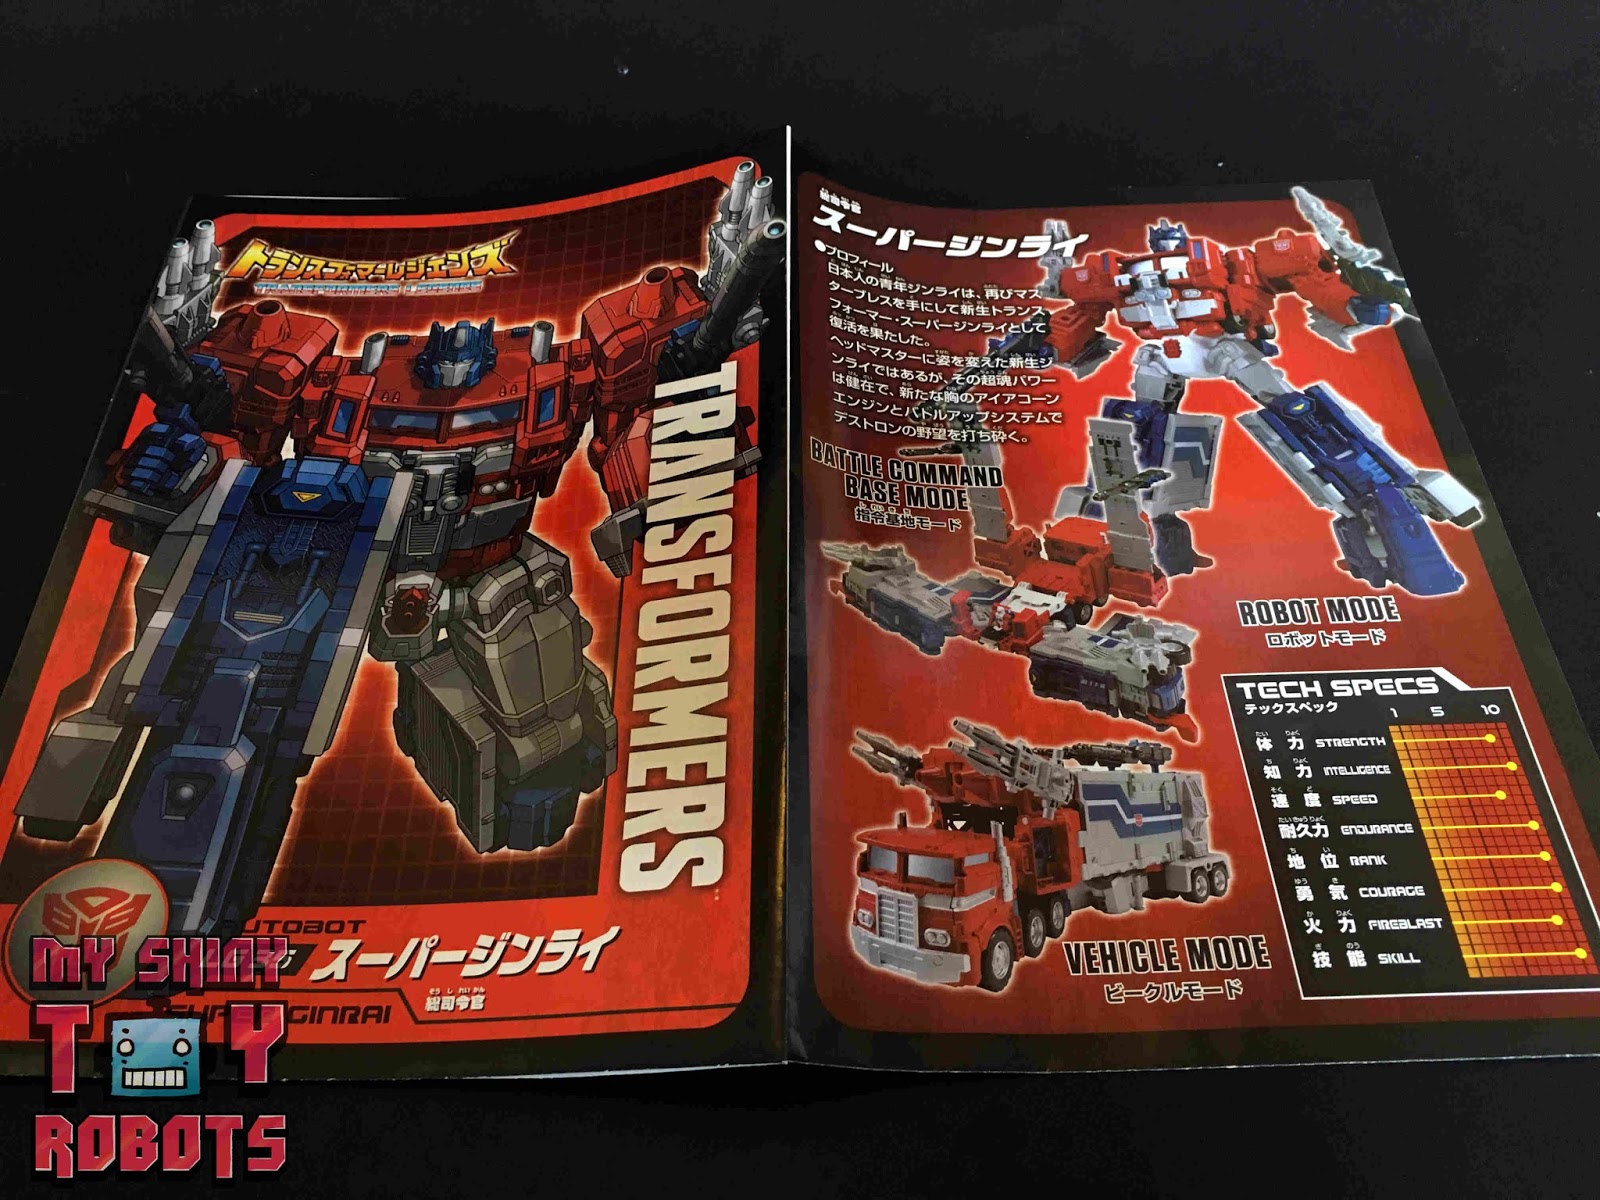 My Shiny Toy Robots: Toybox REVIEW: Transformers Legends LG-35